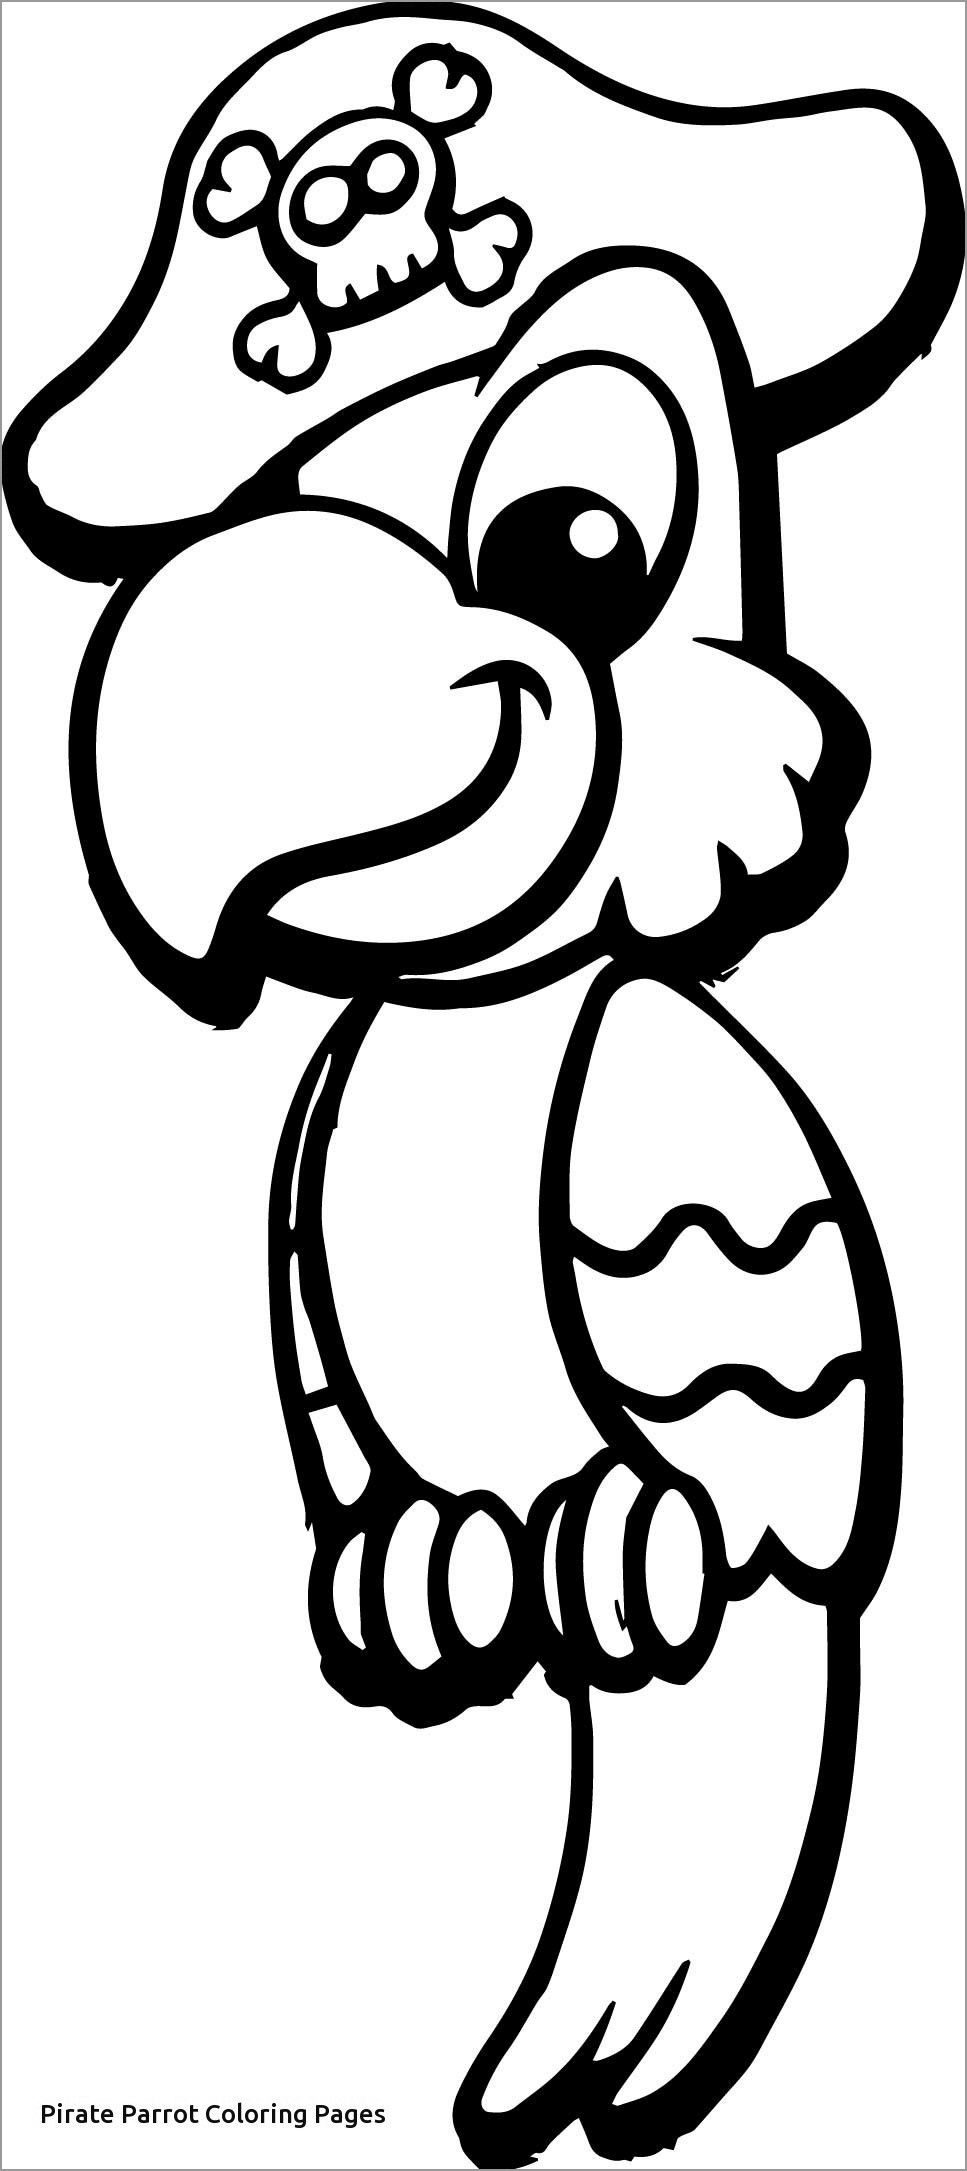 Parrot Pirates Coloring Pages for Kids